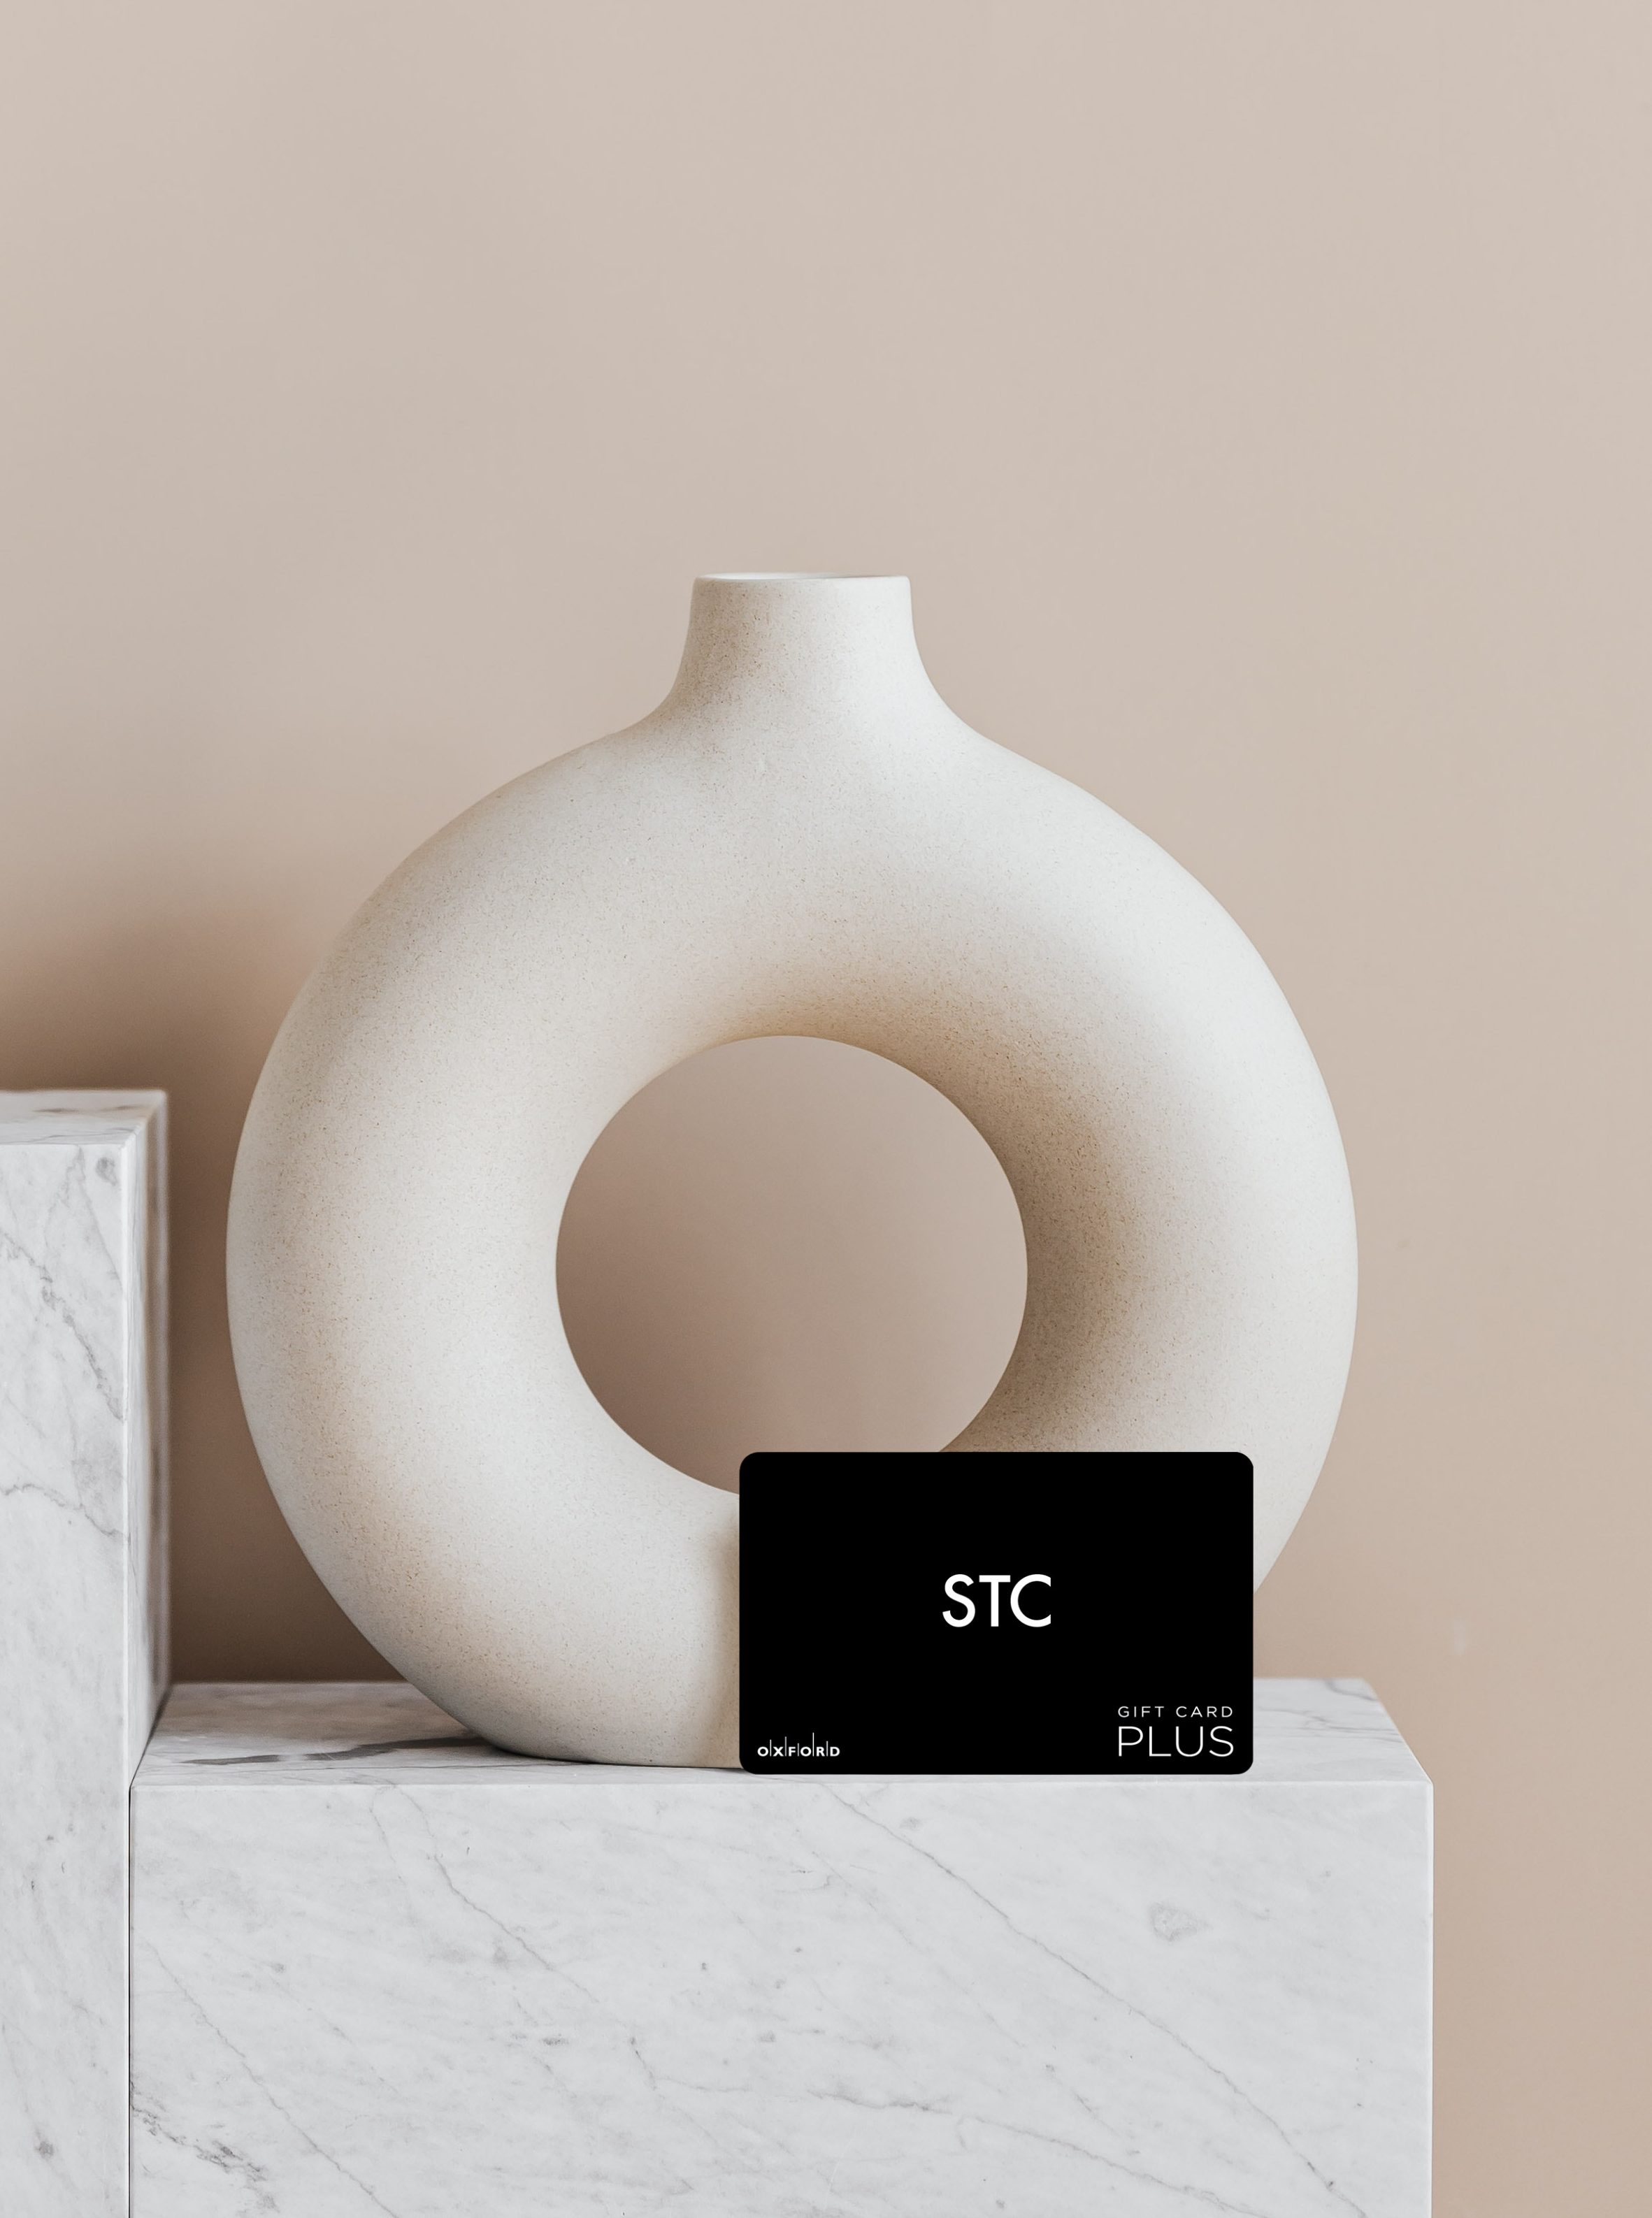 promotional image of a STC gift card in front of a vase